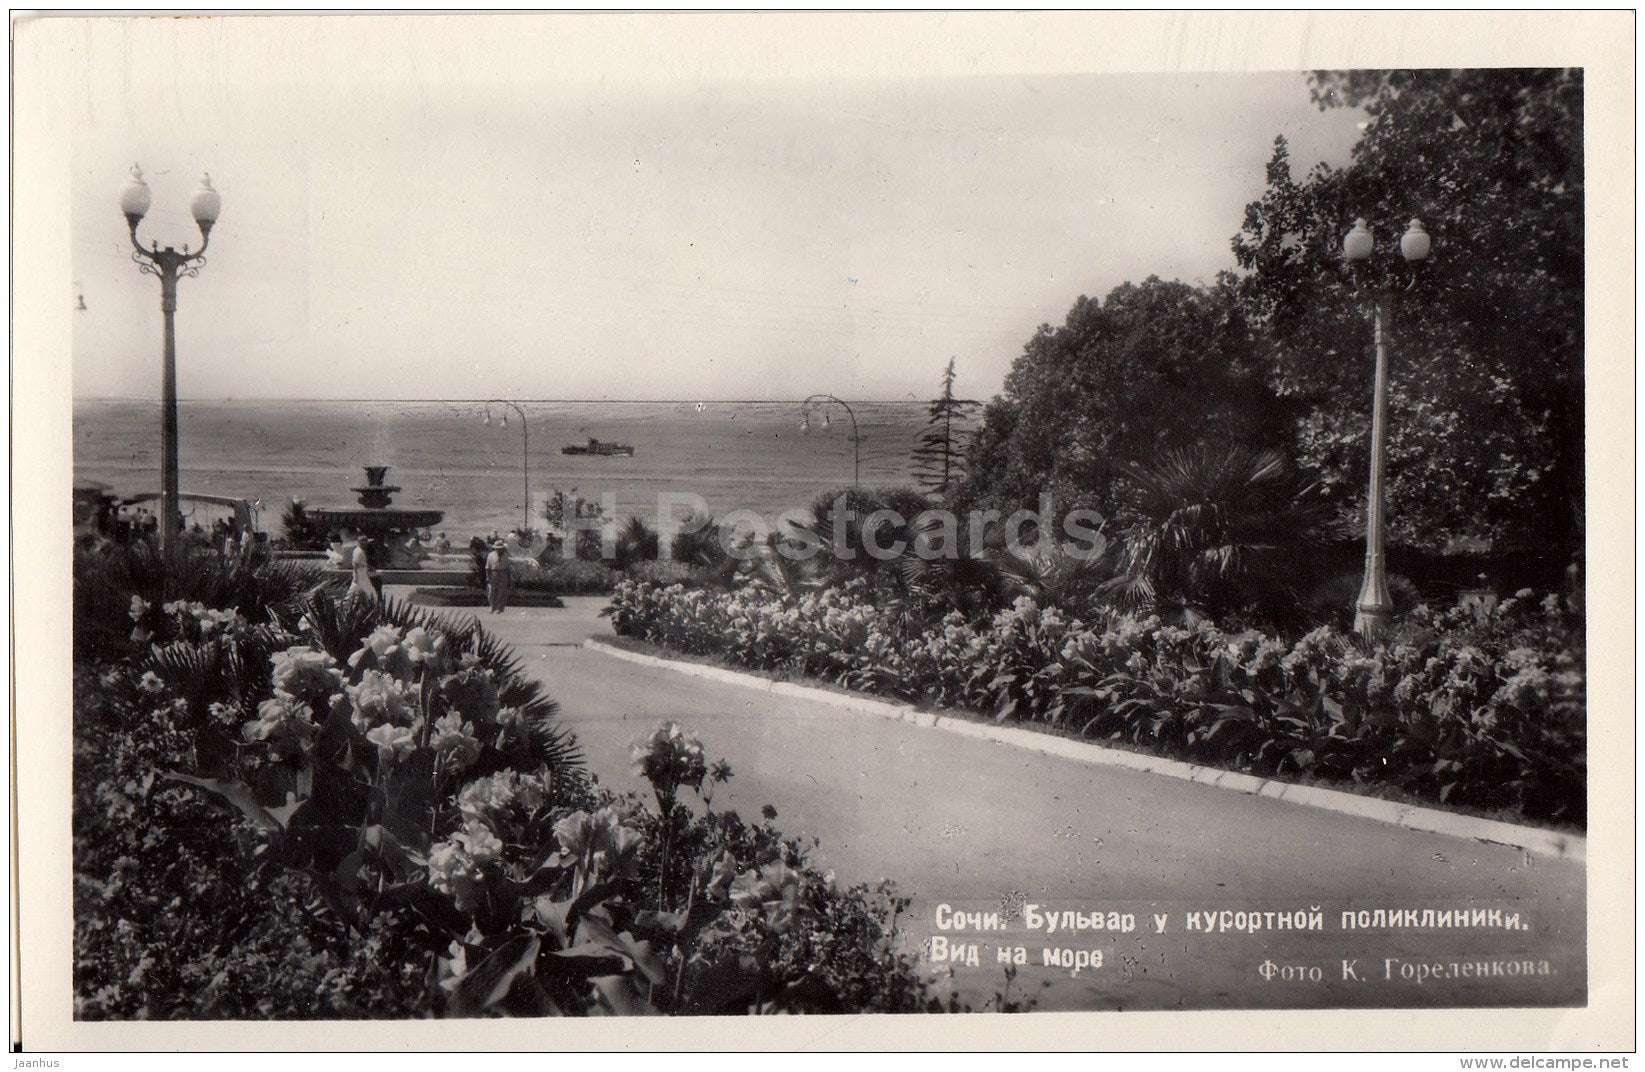 boulevard in the resort clinic - Sochi - photo card - 1954 - Russia USSR - unused - JH Postcards